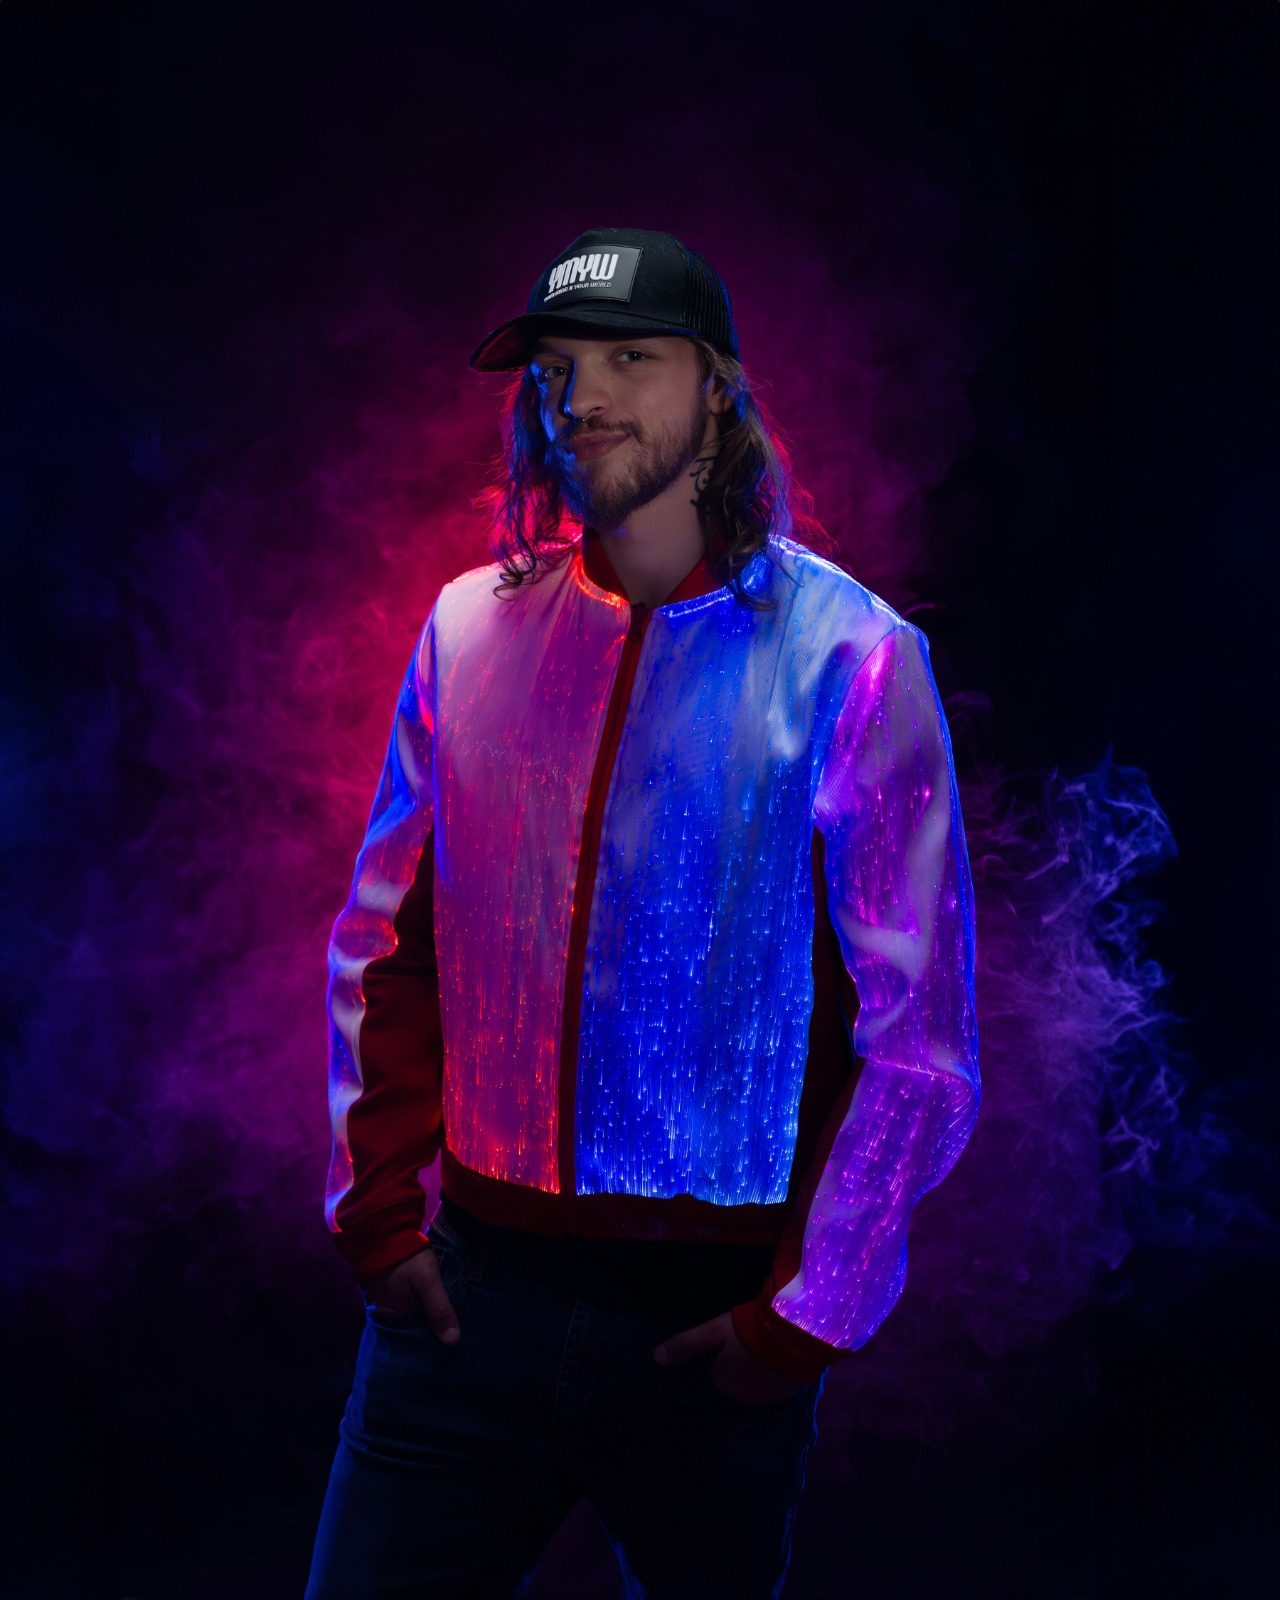 Rave Outfits Christmas Fashion. LED Clothing, Light Up hoodie | Your Mind Your World